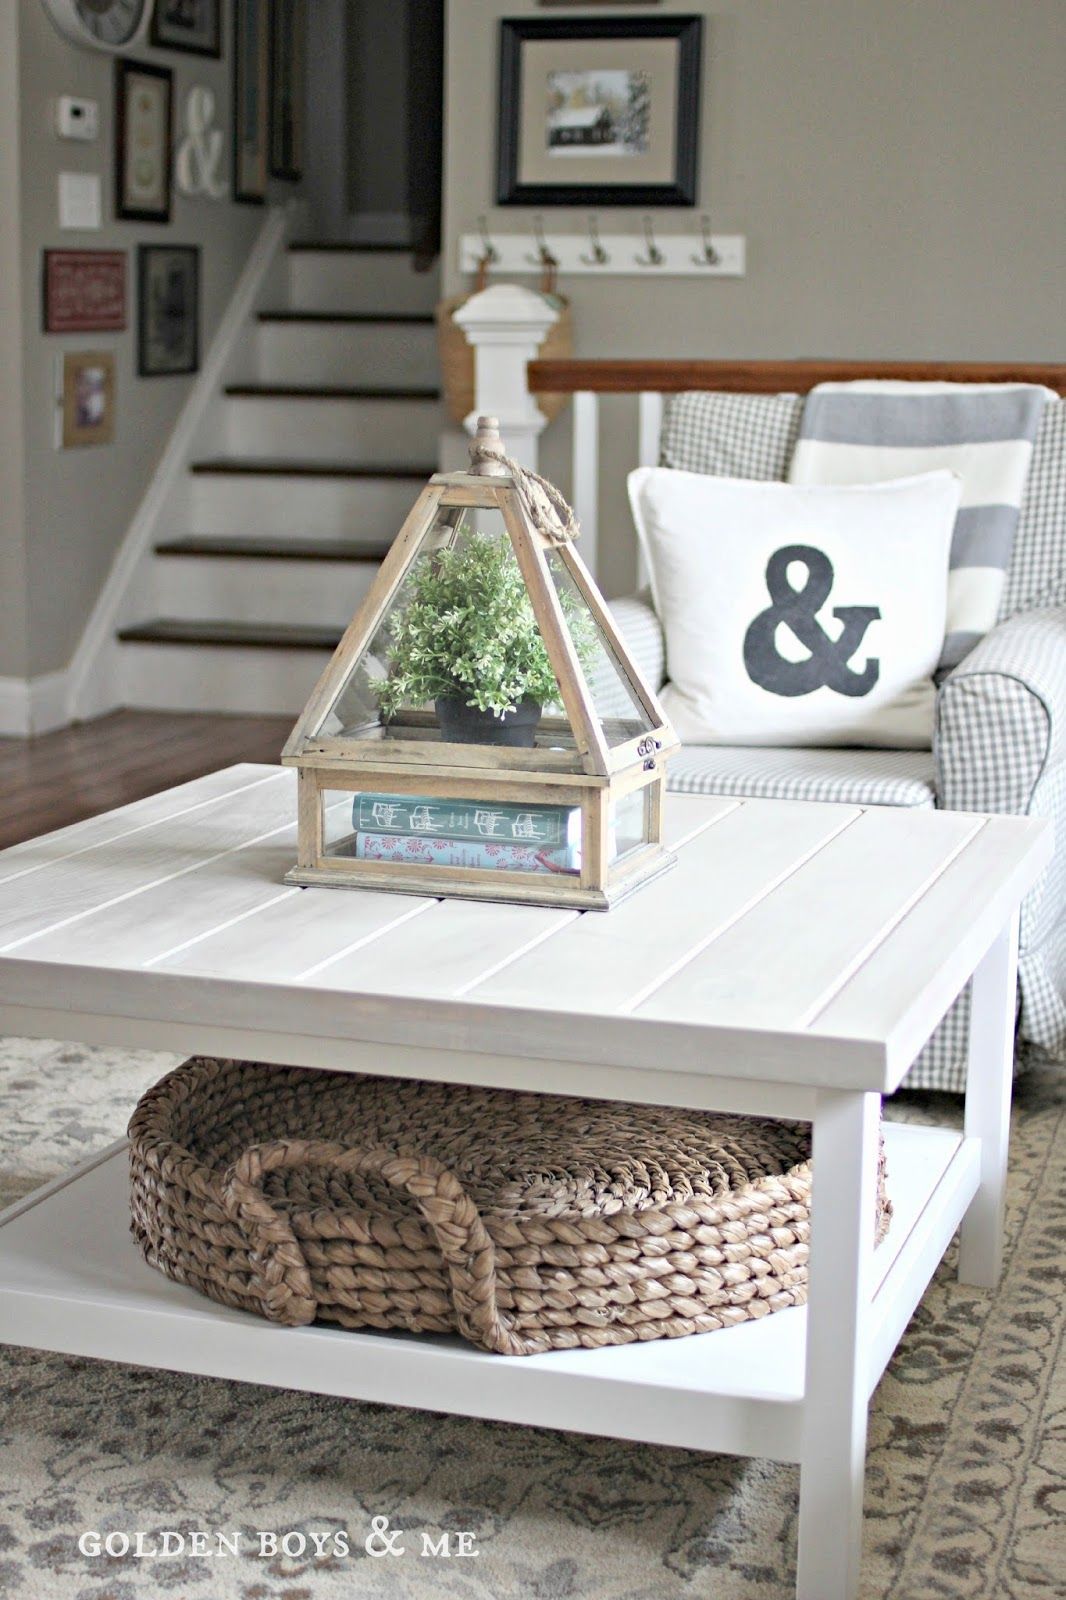 18 Coffee Table Decorating Ideas   How to Style Your Coffee Table